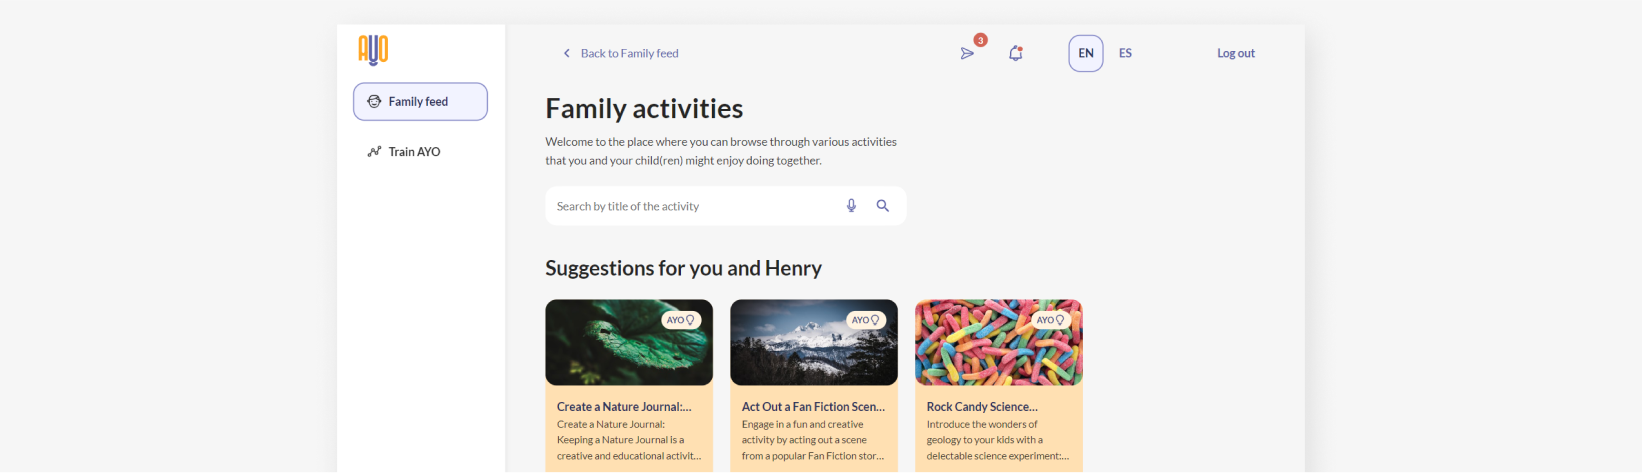 Family Activity Suggestions